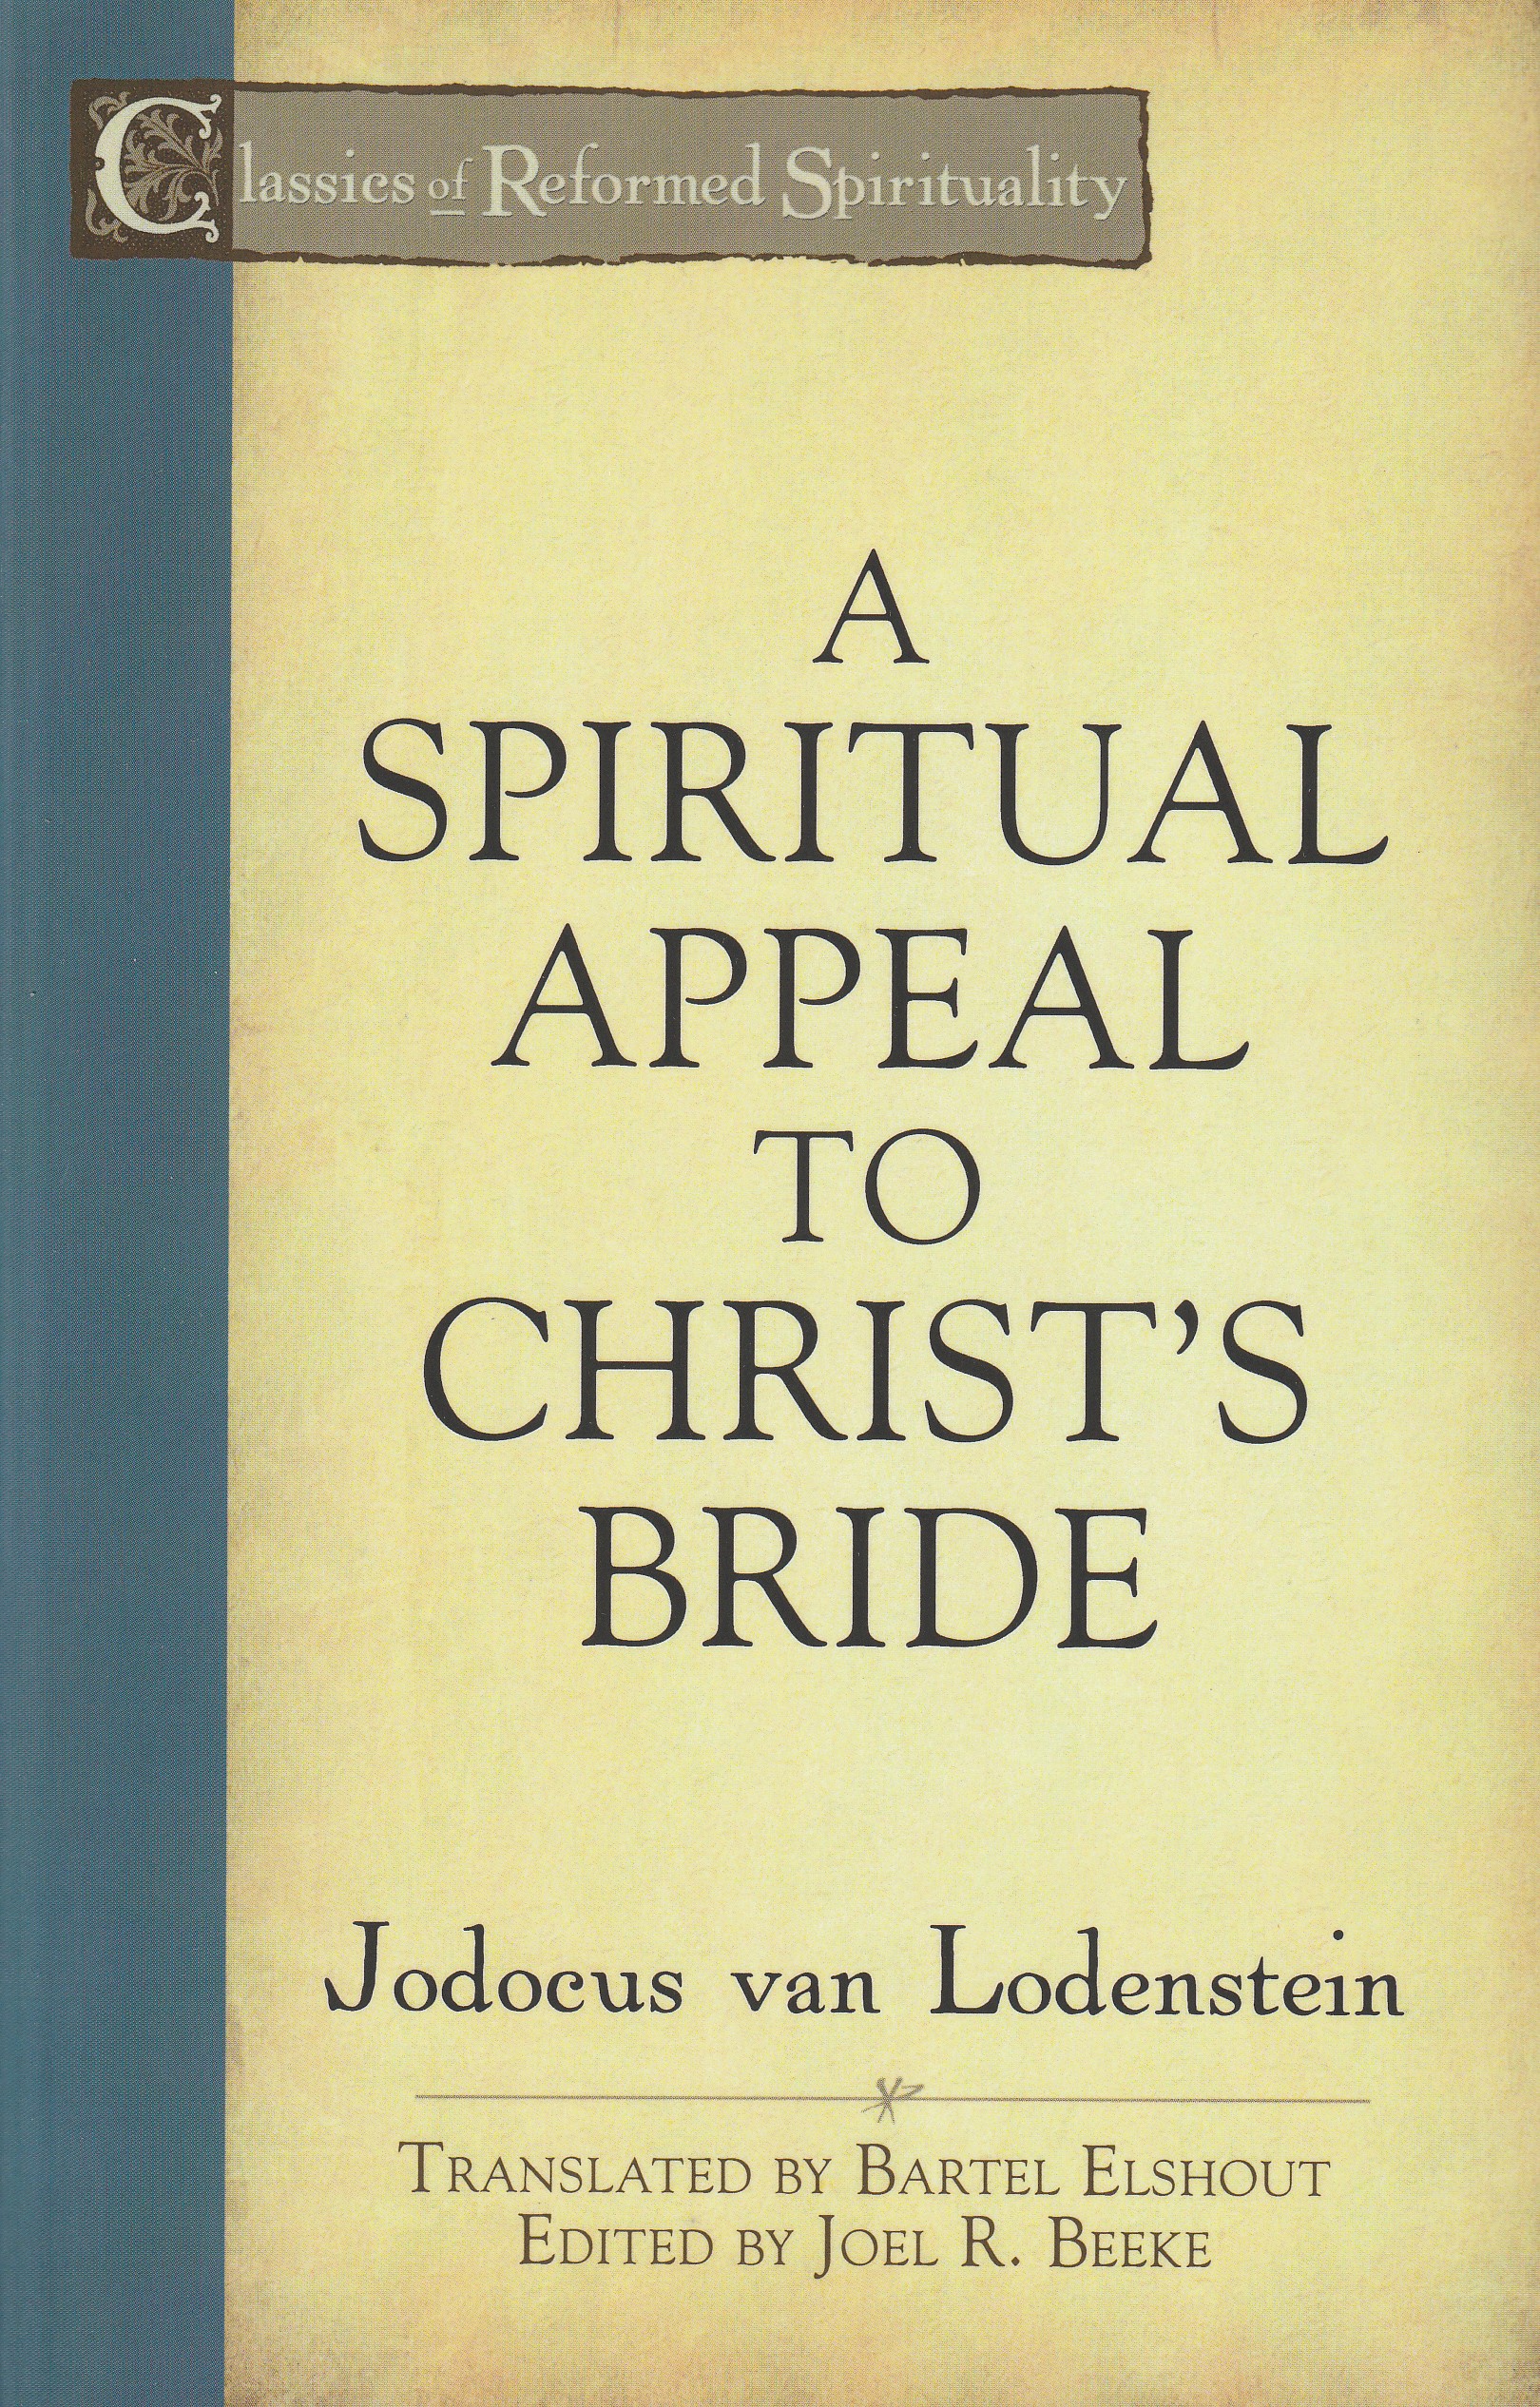 A Spiritual Appeal to Christ's Bride, Special Offer: £9.59 (RRP: £11.99)